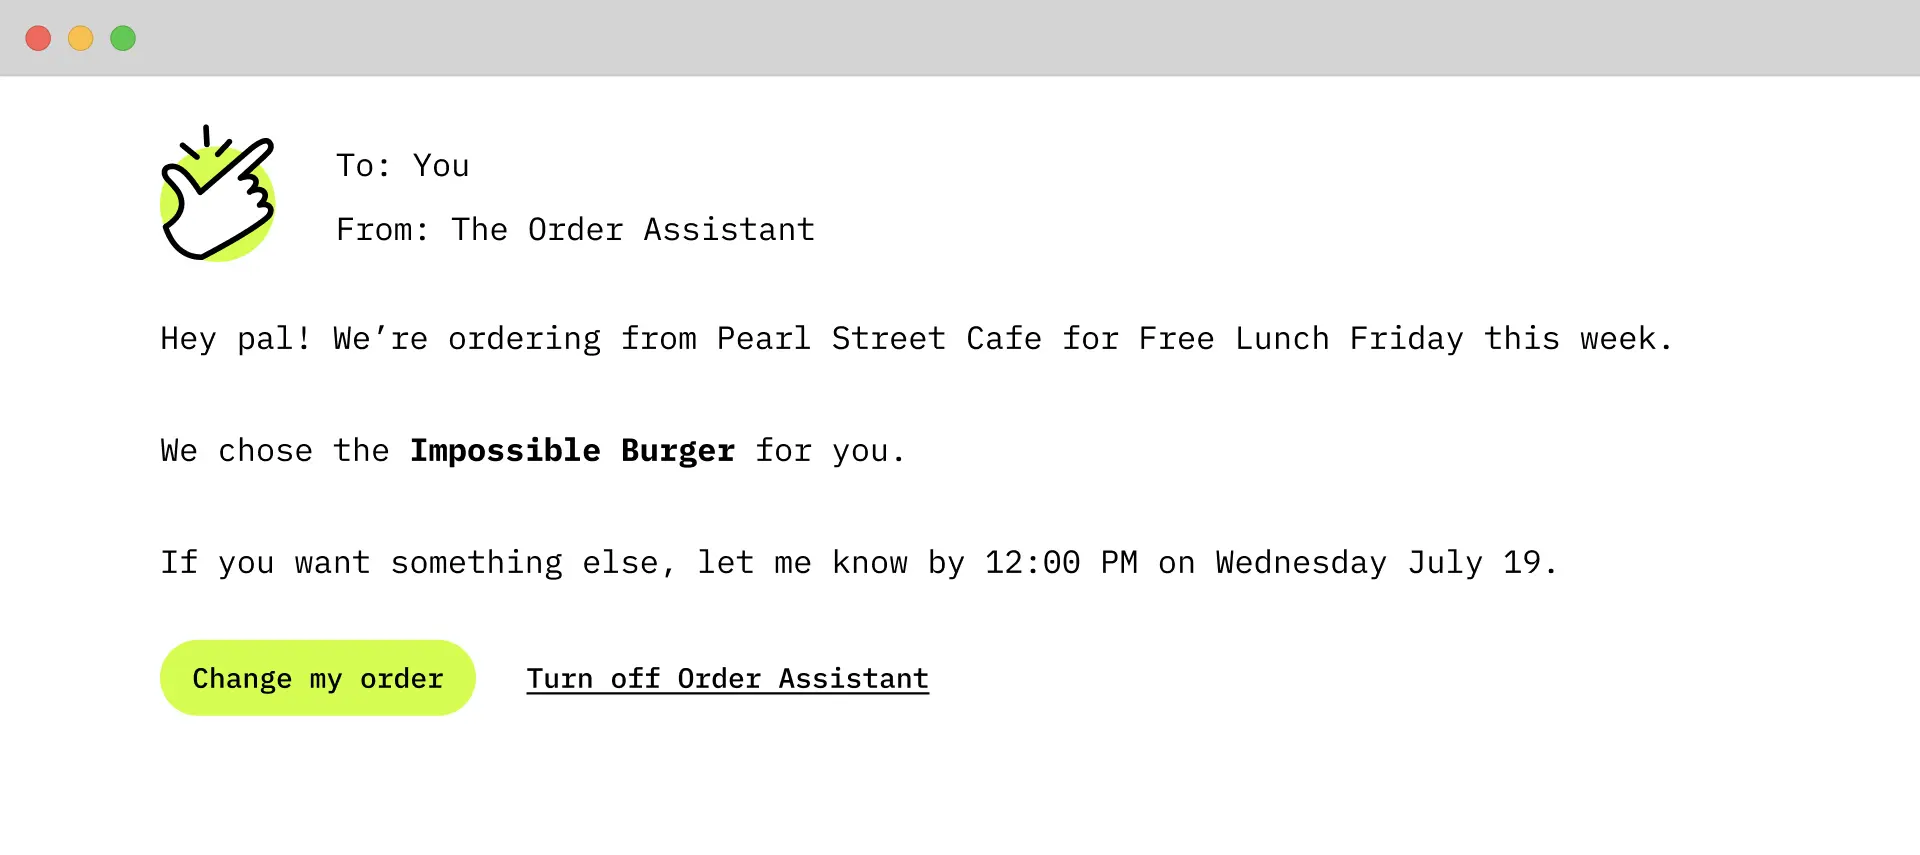 A screenshot of the assistant in action. It shows an email style message to 'You' from 'The Order Assistant' with a message saying 'Hey pal! We’re ordering from Pearl Street Cafe for Free Lunch Friday this week. We chose the Impossible Burger for you. If you want something else, let me know by 12:00 PM on Wednesday July 19.